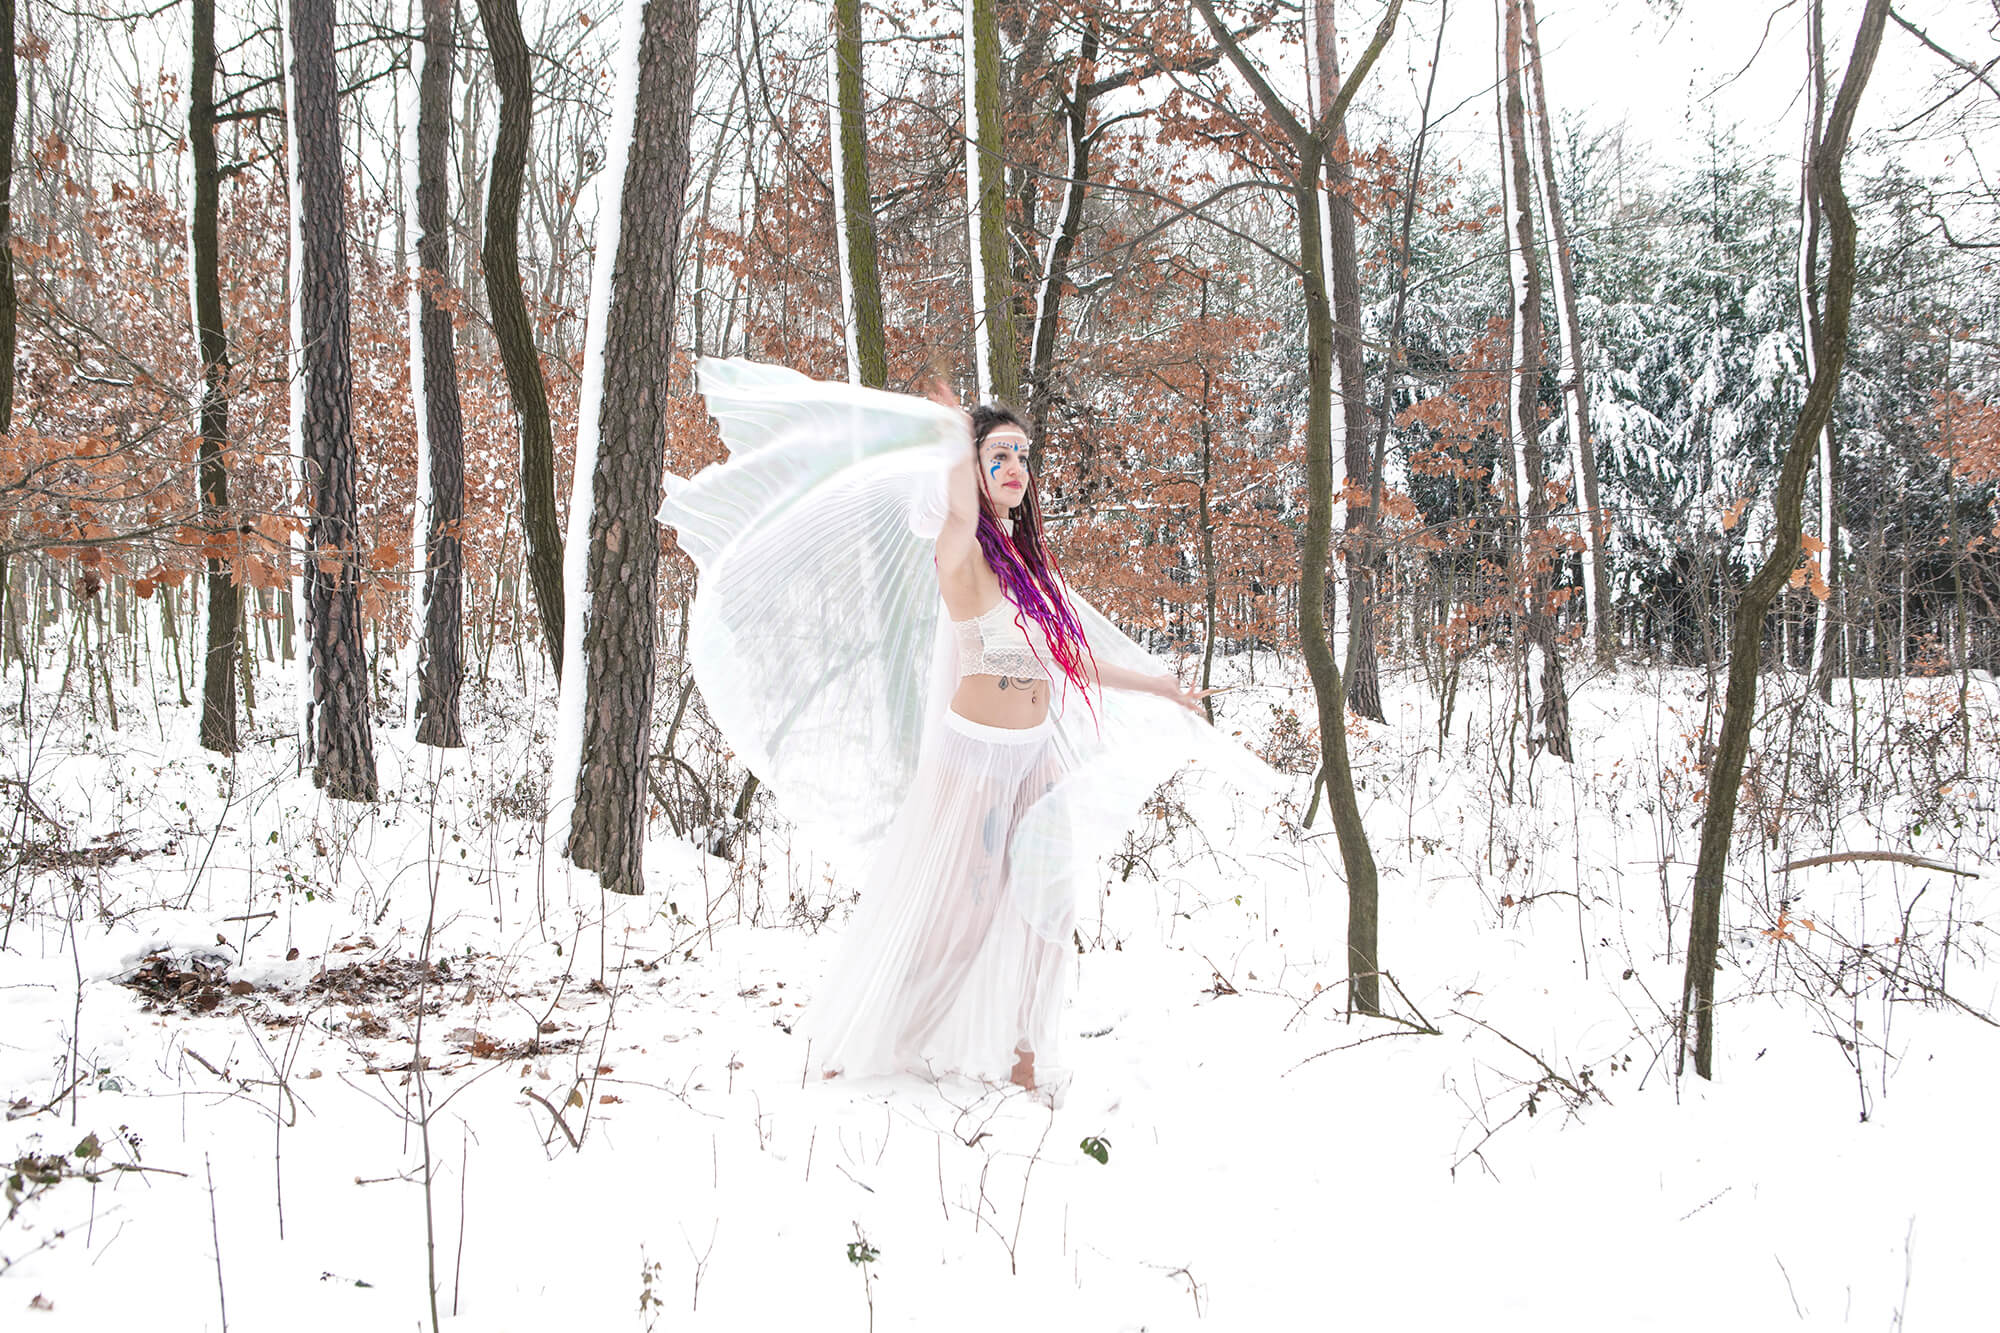 A wintar fairy dancing in the snow, a photo a woman dressed in white as a fairy, dancing in the snow